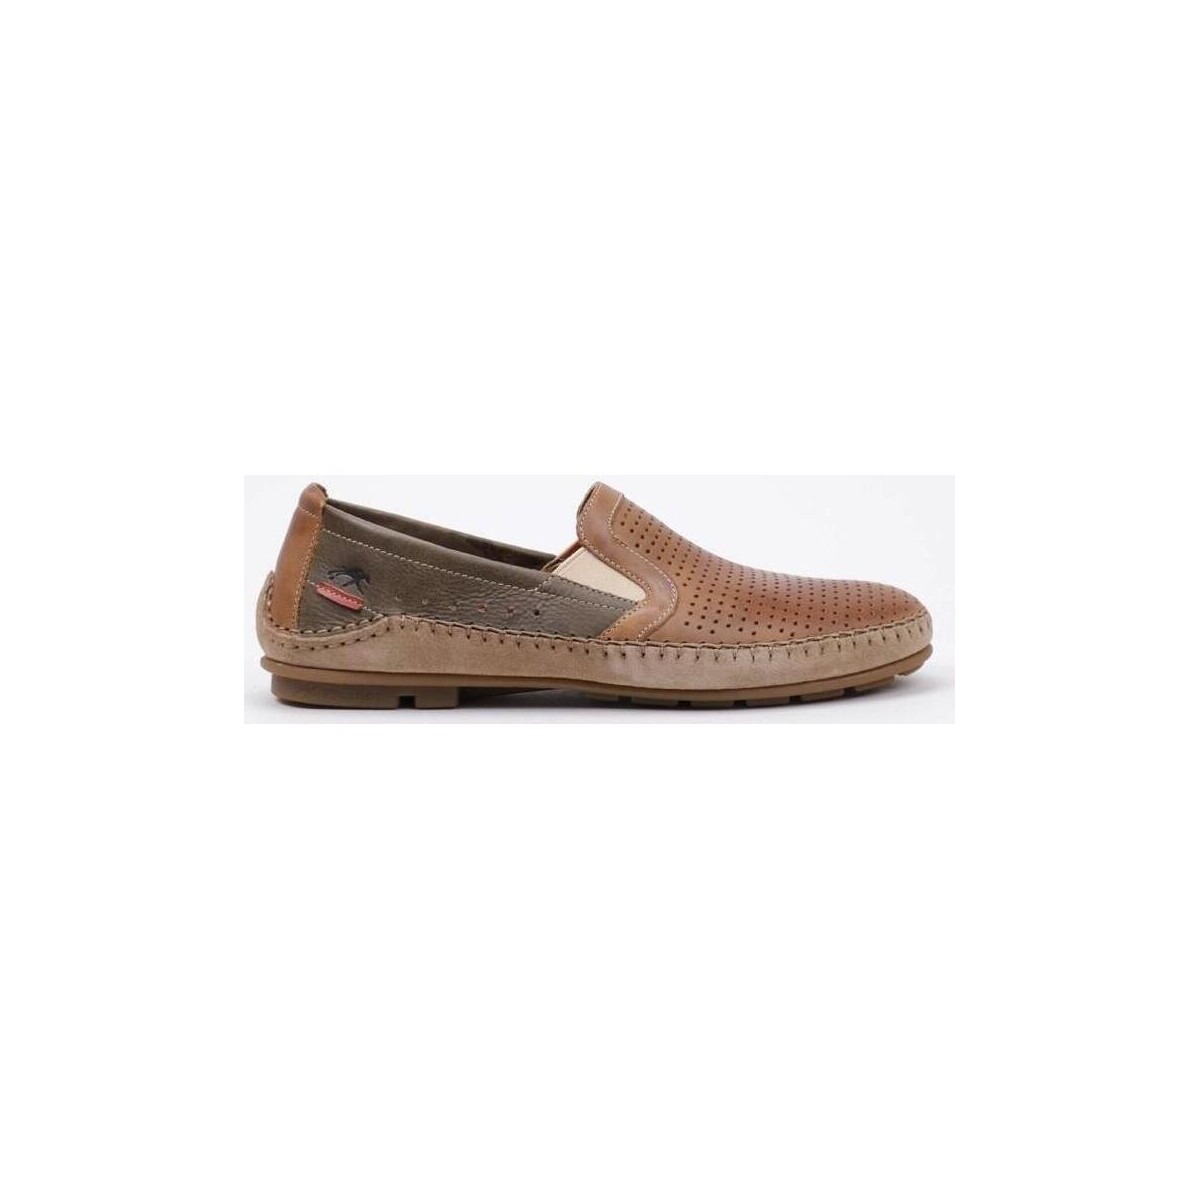 Moccasins in Brown for Man by Spartoo GOOFASH